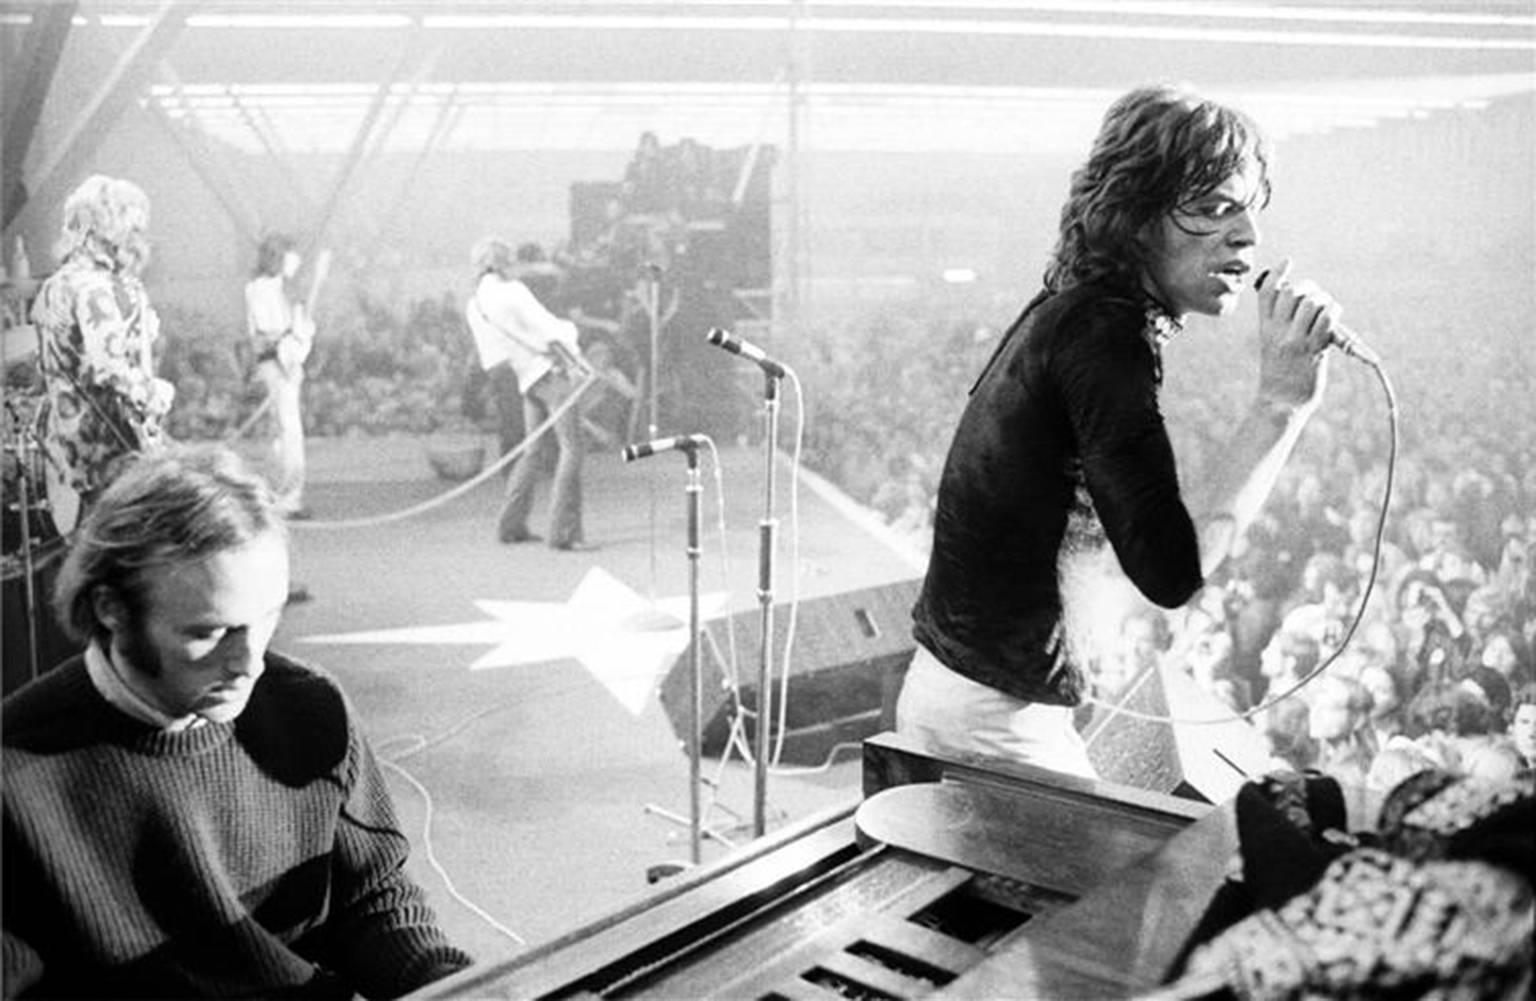 Henry Diltz Black and White Photograph – Rolling Stones & Stephen Stills in Amsterdam, 1970